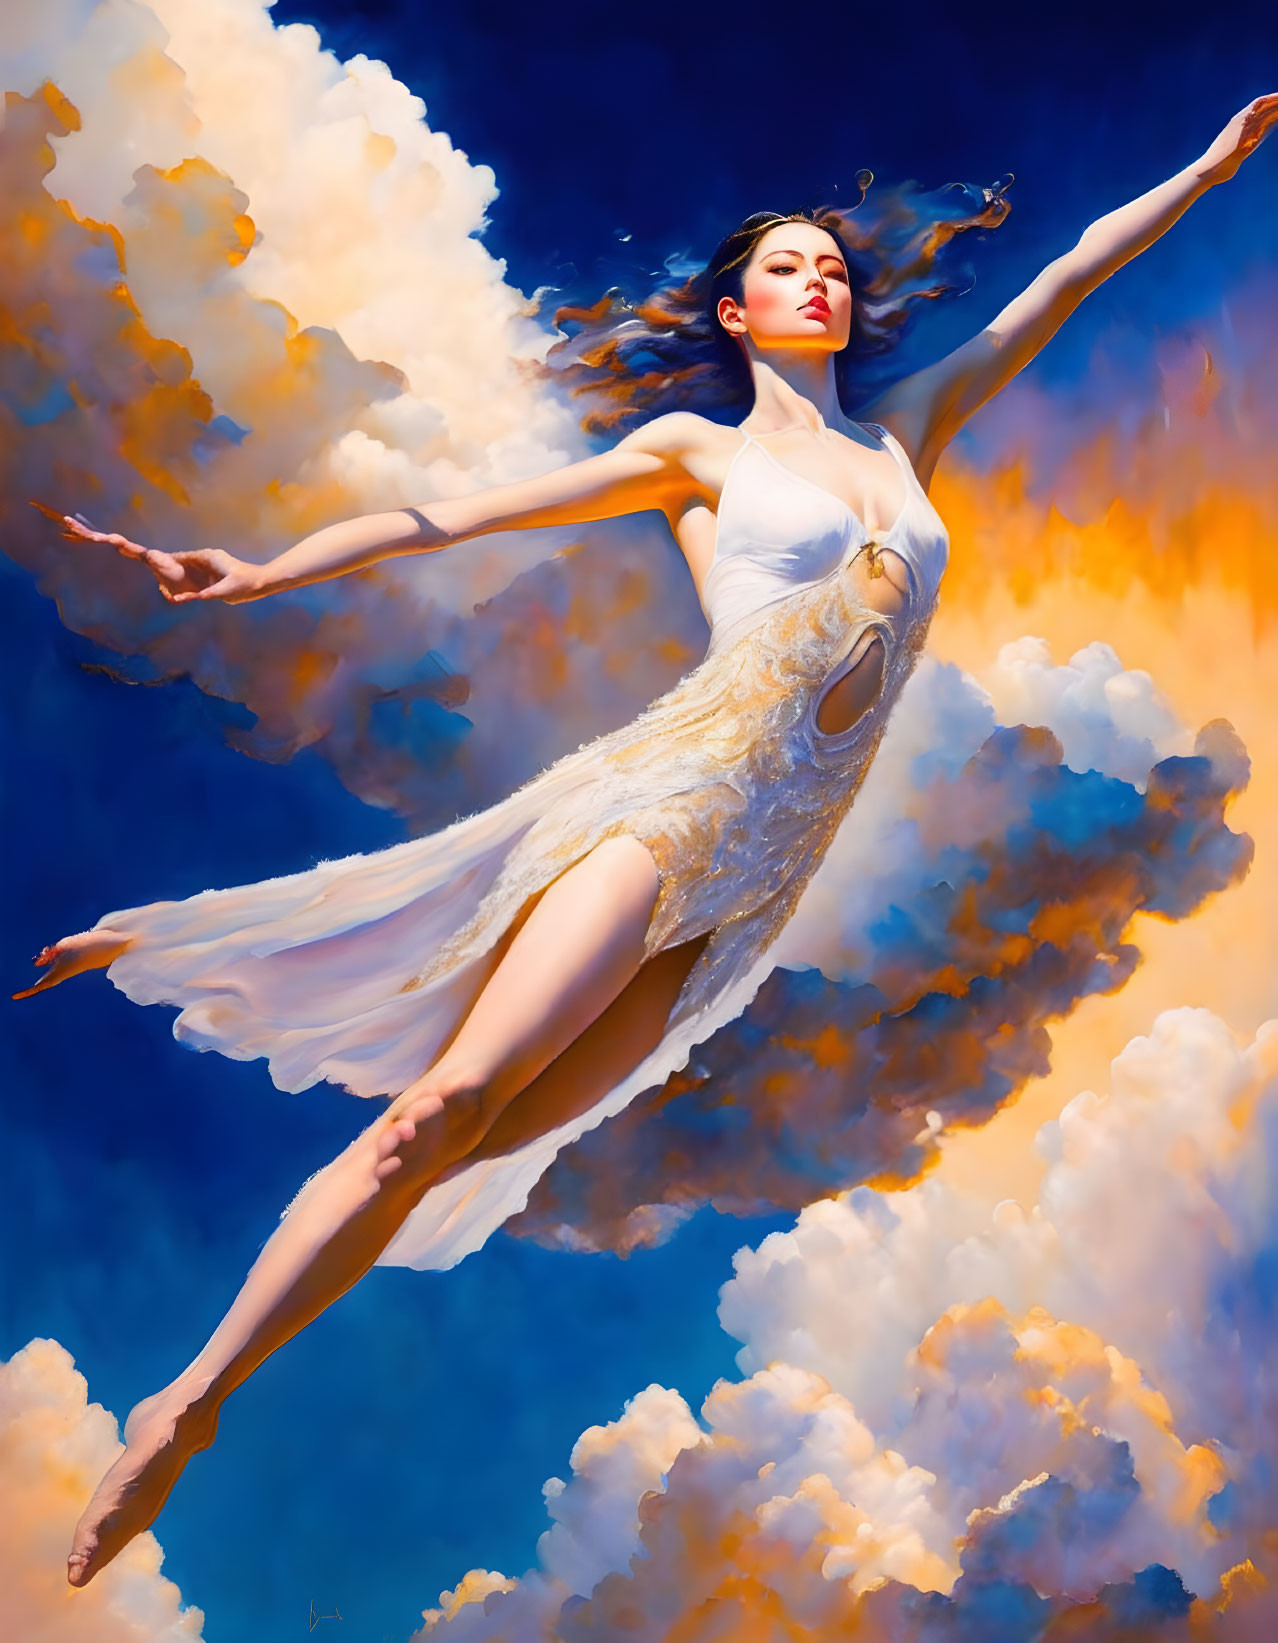 Dance on clouds